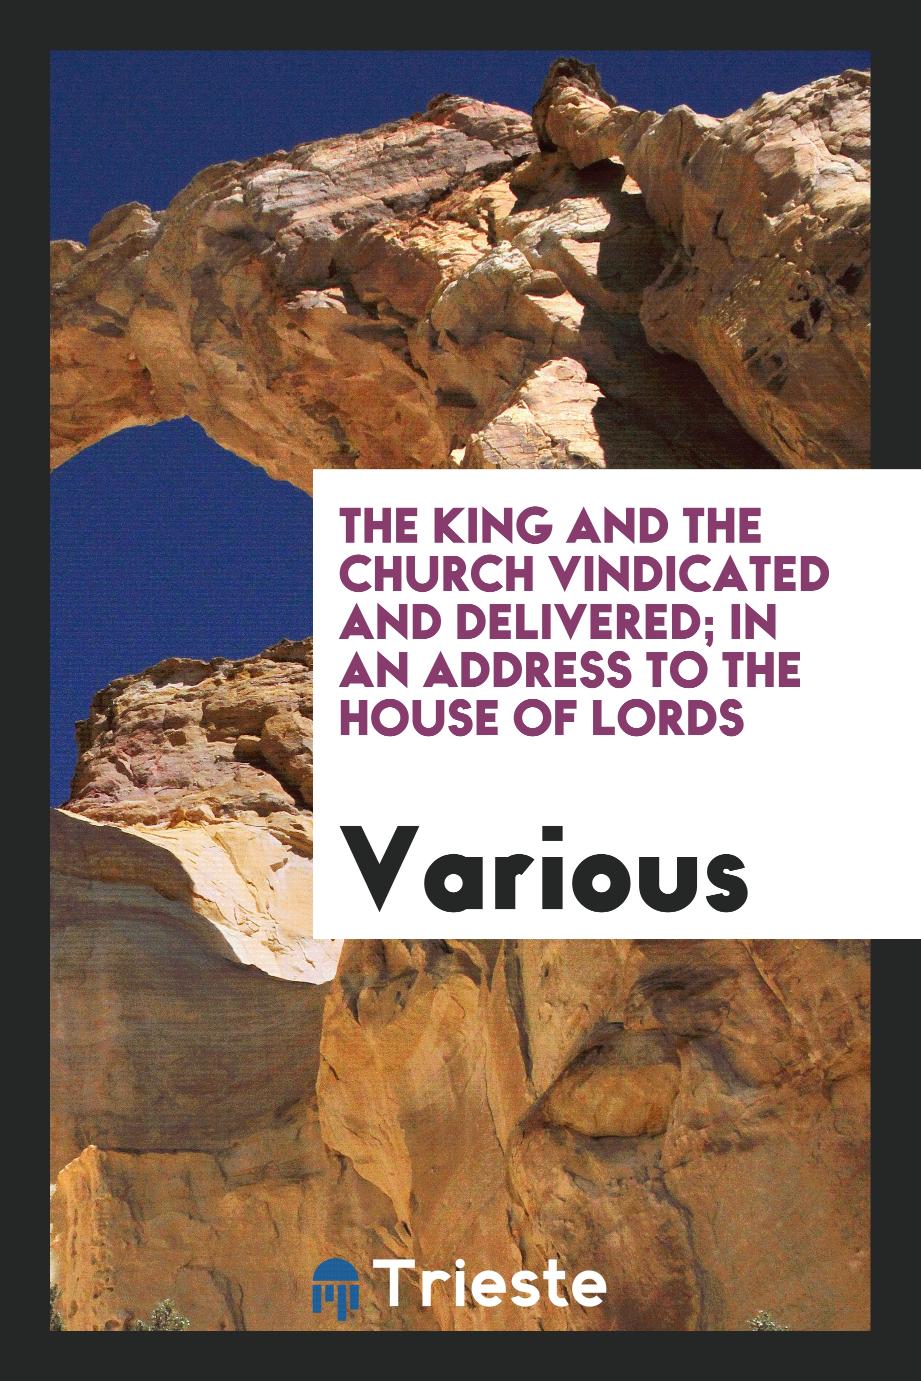 The King and the Church Vindicated and Delivered; in an address to the House of lords